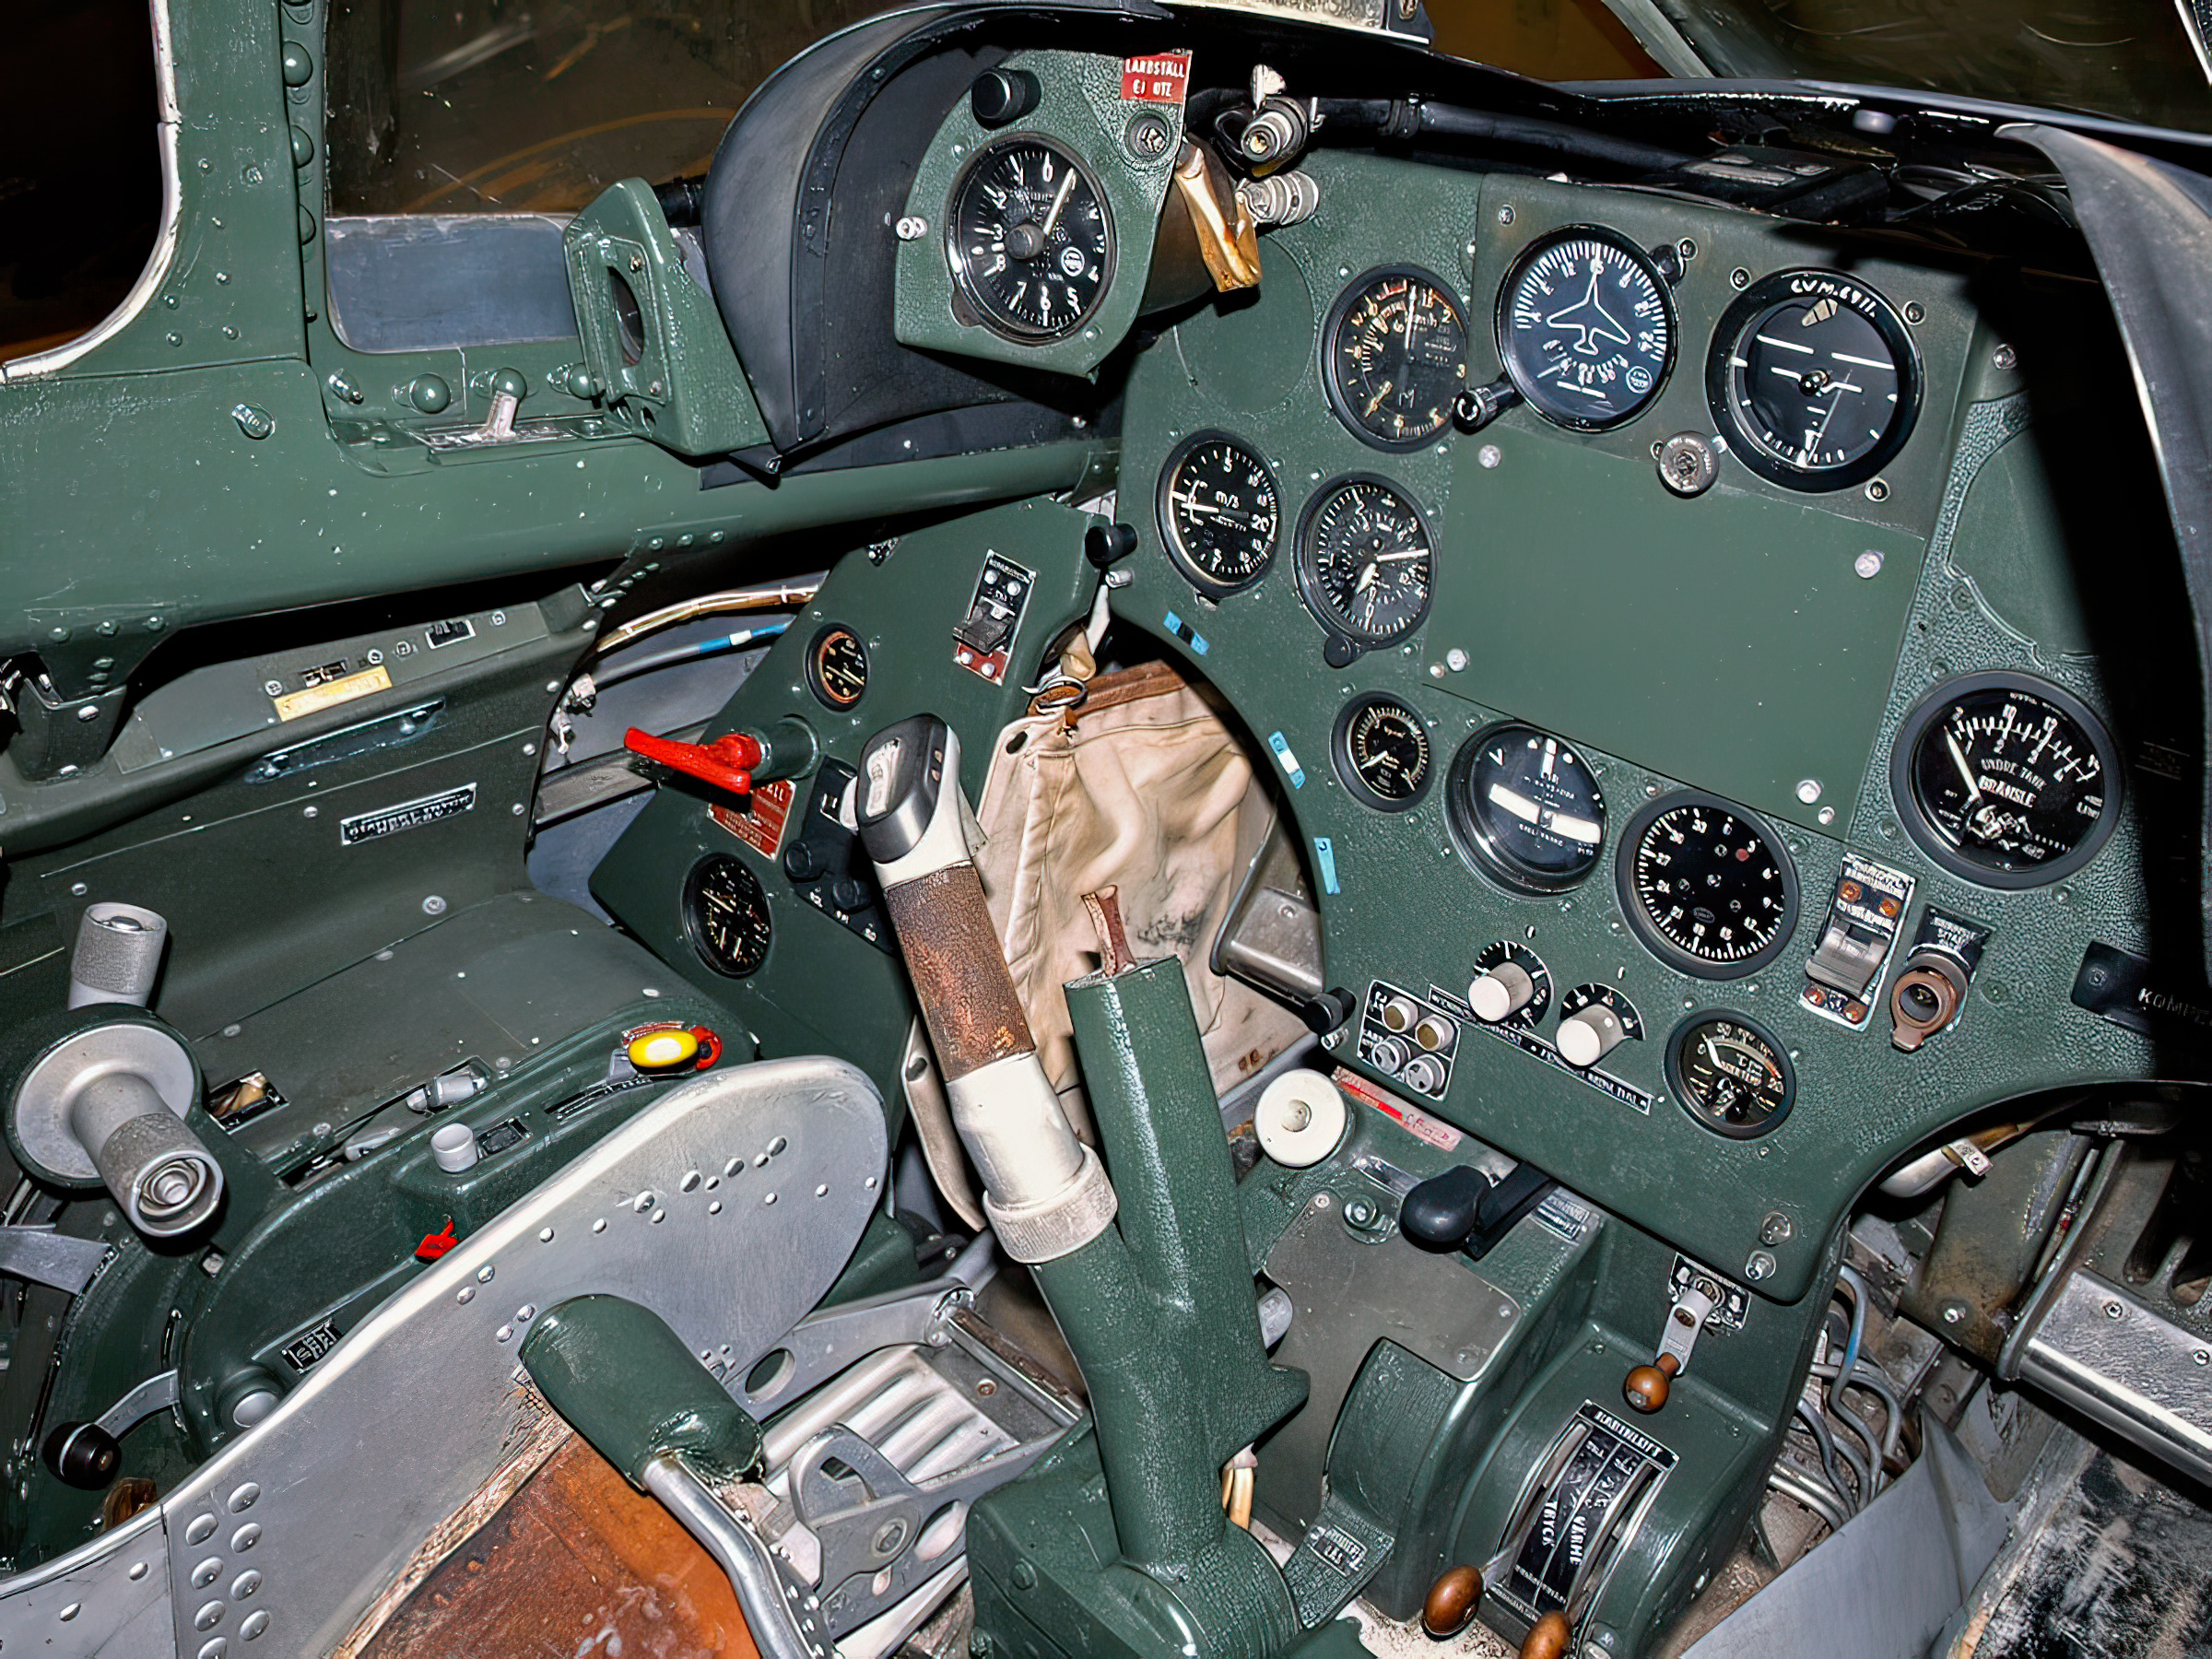 The cockpit of a J 29F